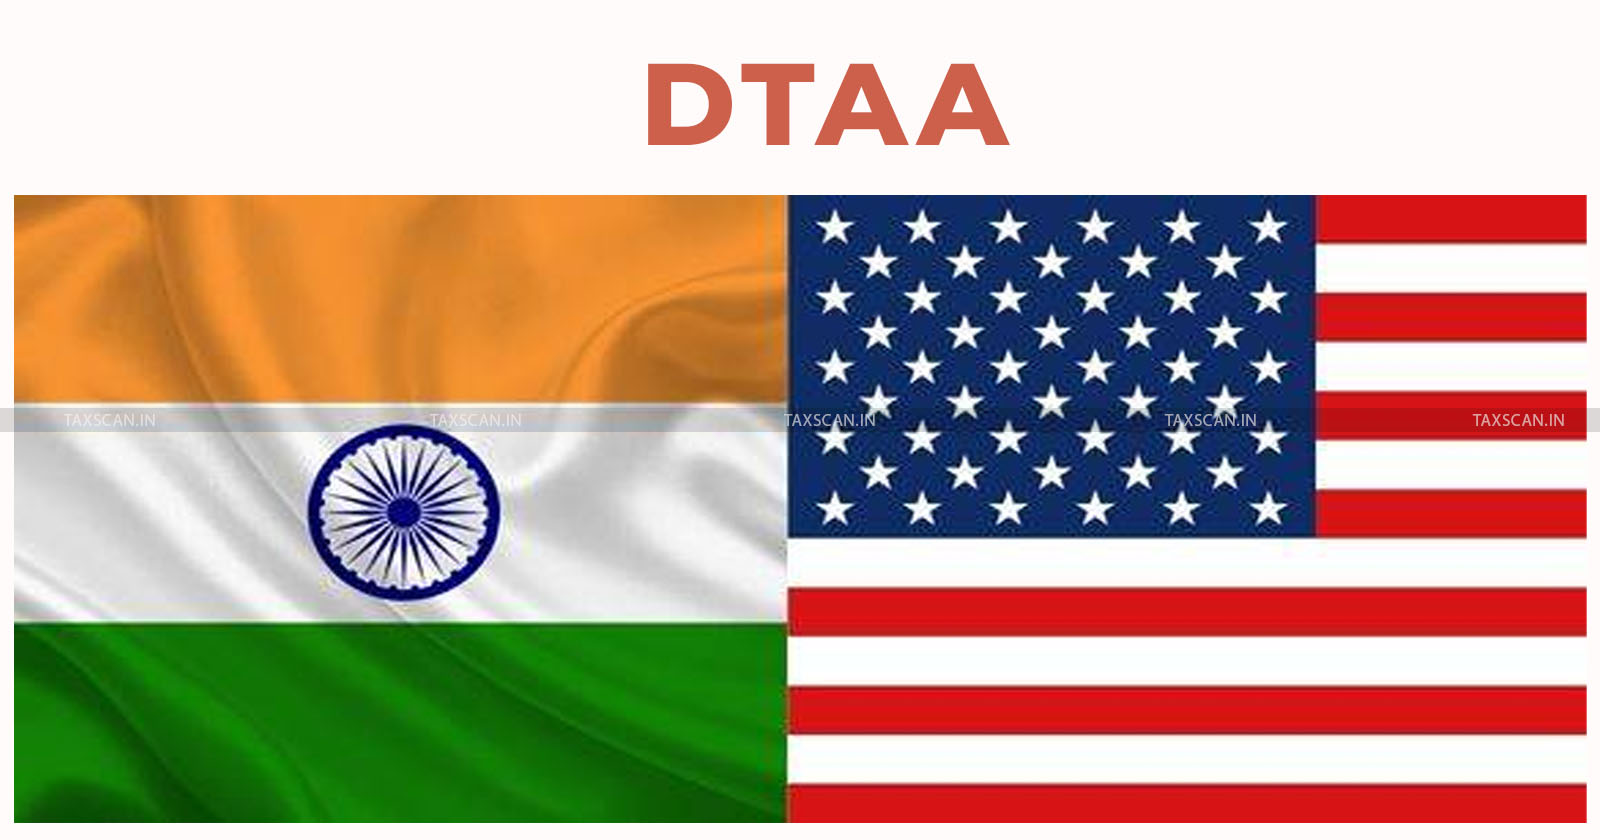 Receipt from Support Services - Treated as FIS under - India -USA DTAA-ITAT - Income Tax -TAXSCAN